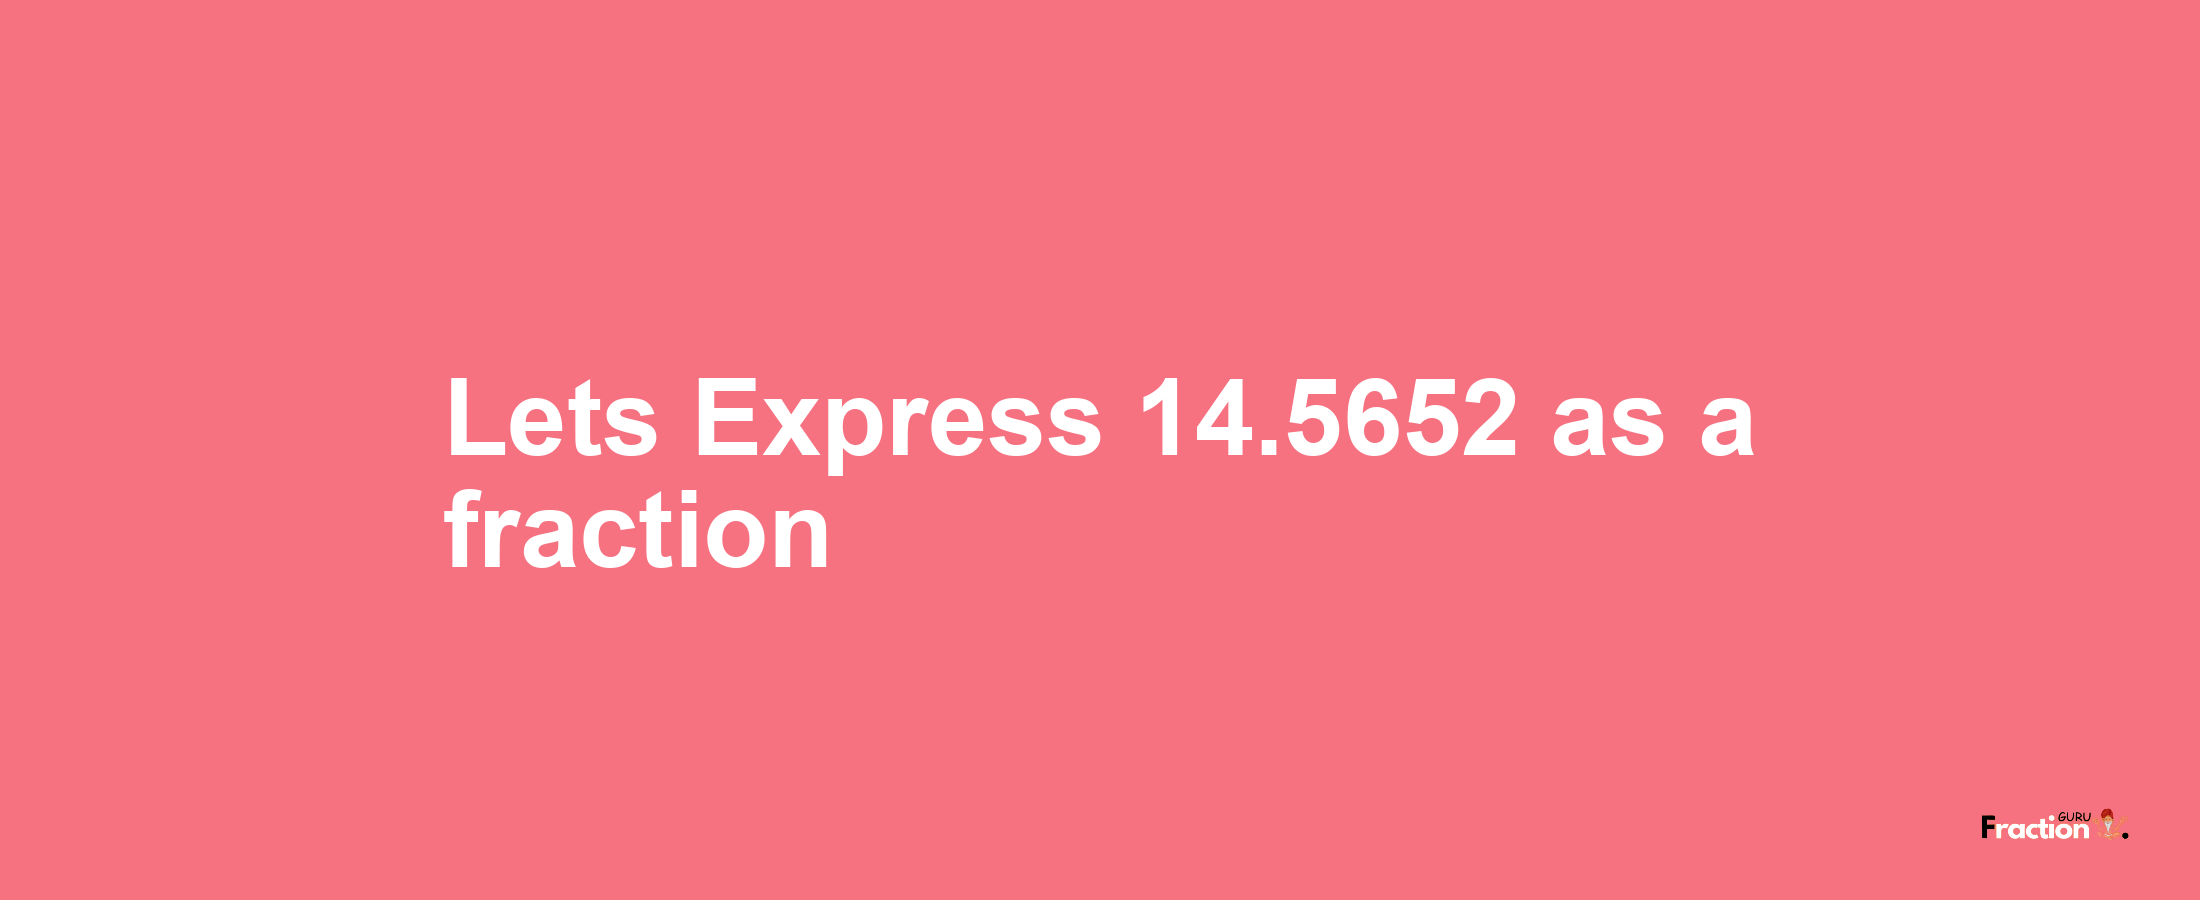 Lets Express 14.5652 as afraction